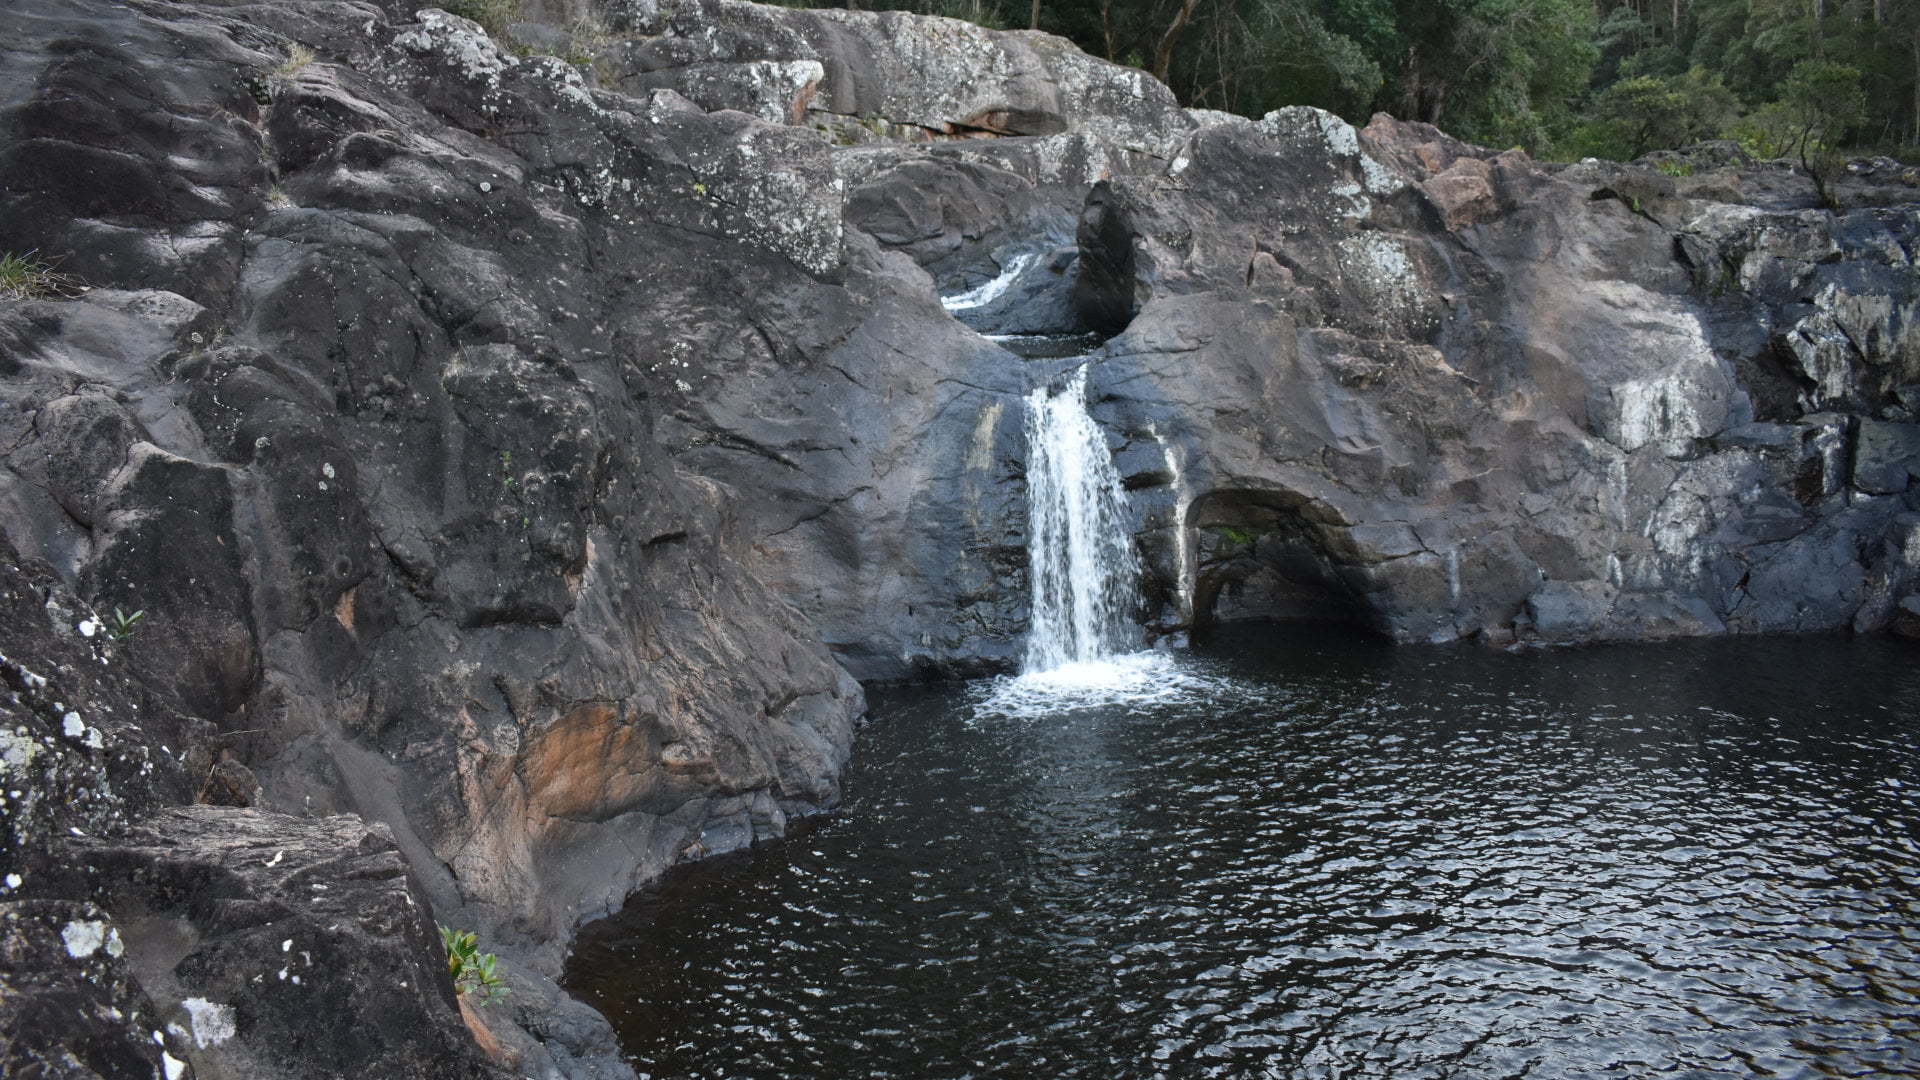 Waterfall cascading from the middle of the rocks into a waterhole, Wappa Falls downstream from Wappa Dam at Yandina